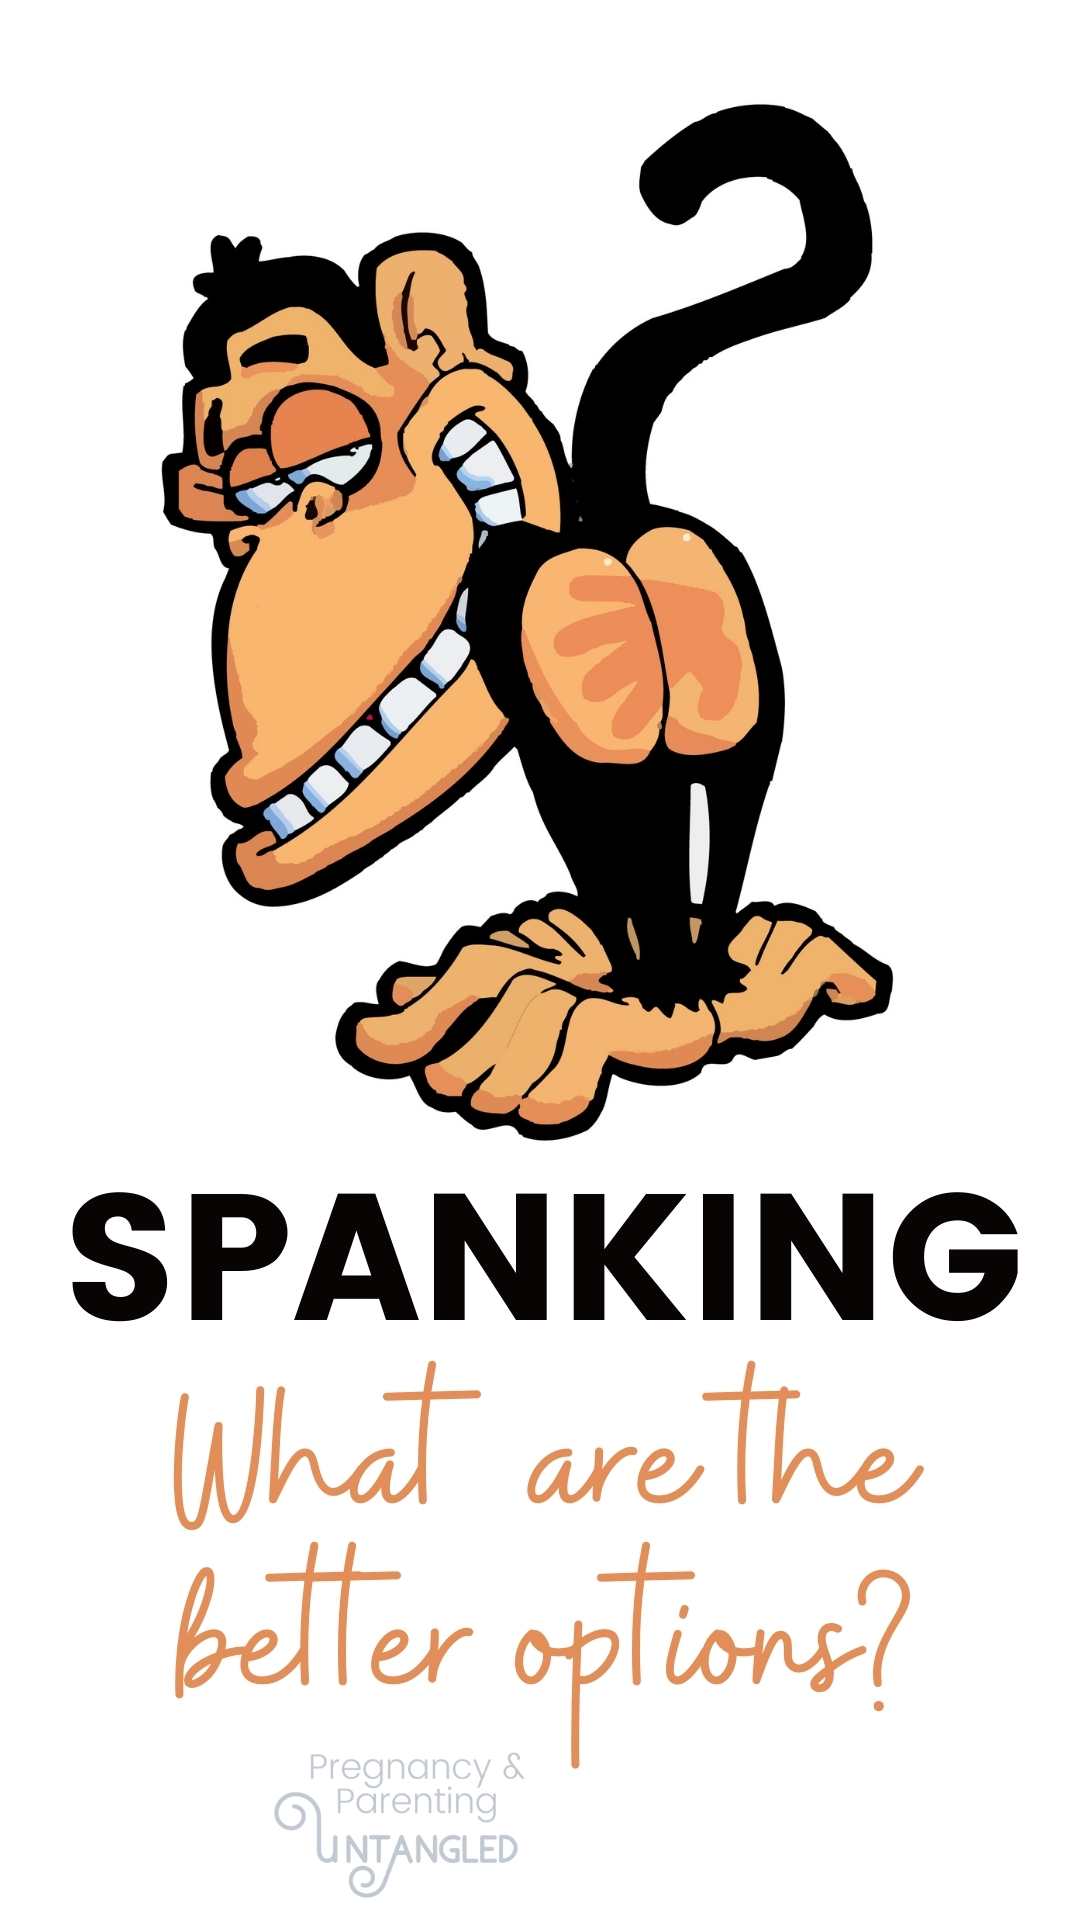 Is spanking a good option for kids? What can we do to not spank, but still get kids who we can help raise to be successful people. via @pullingcurls